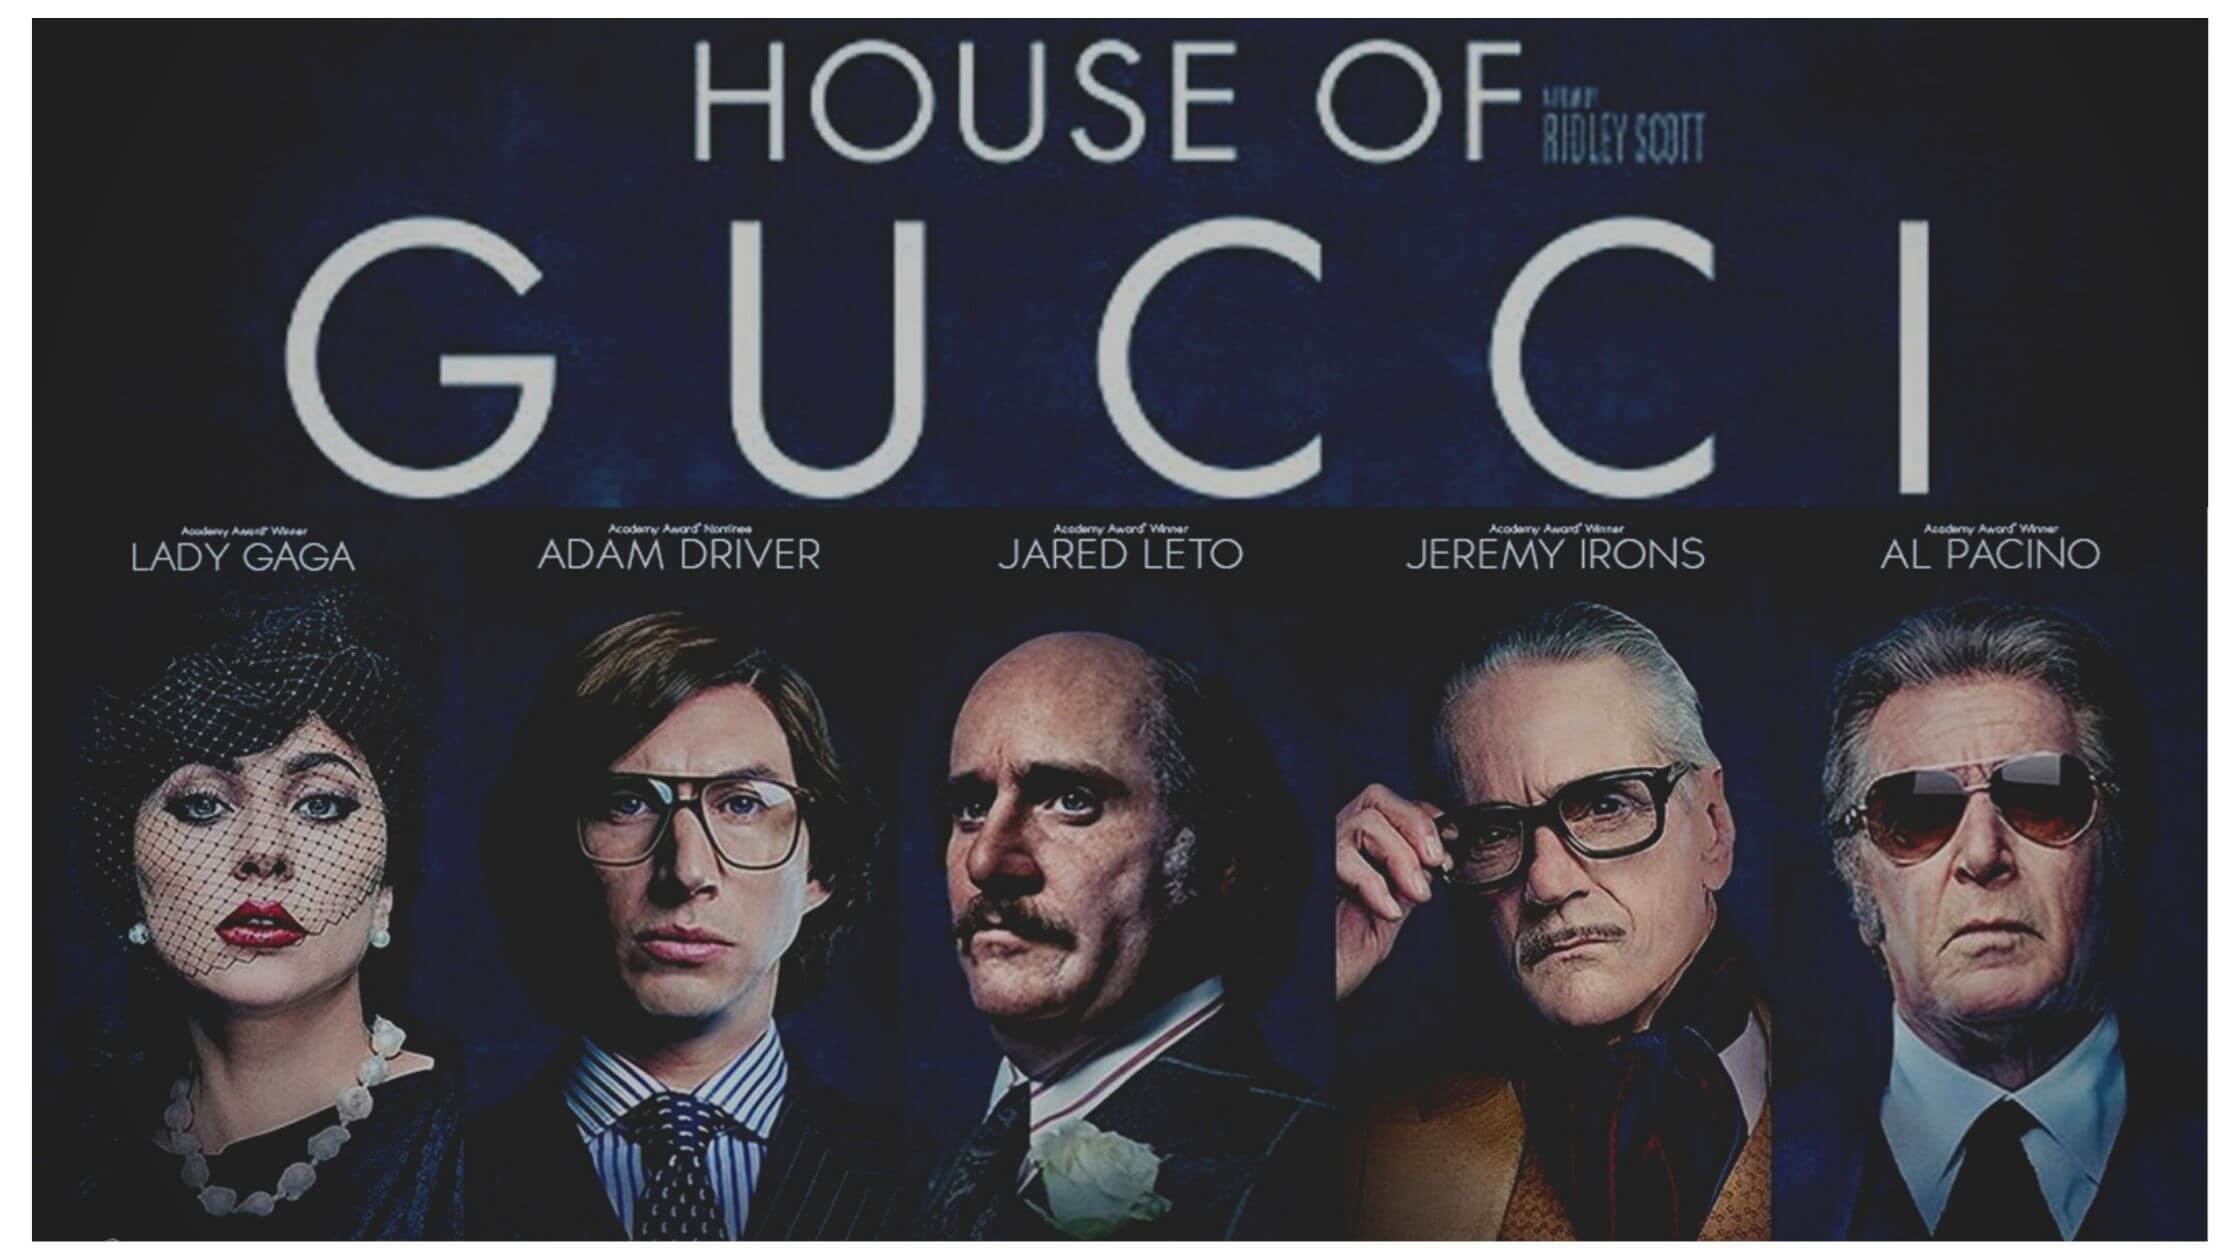 House Of Gucci